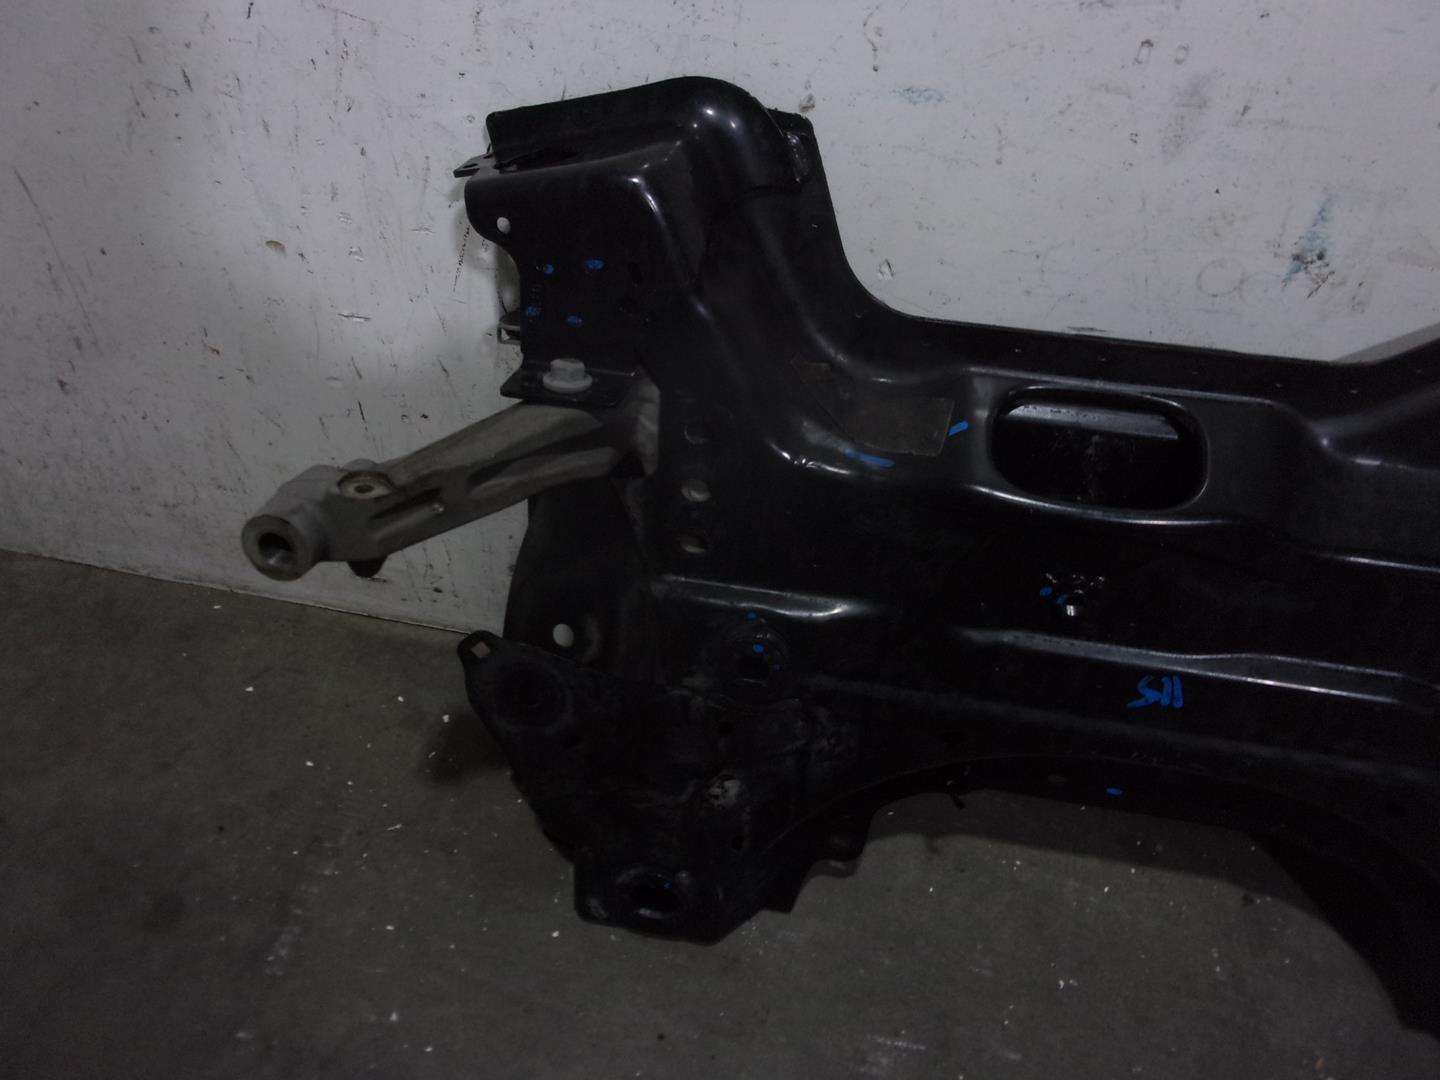 CITROËN C4 Picasso 2 generation (2013-2018) Front Suspension Subframe 9677071880, CUNAMOTOR 24530750